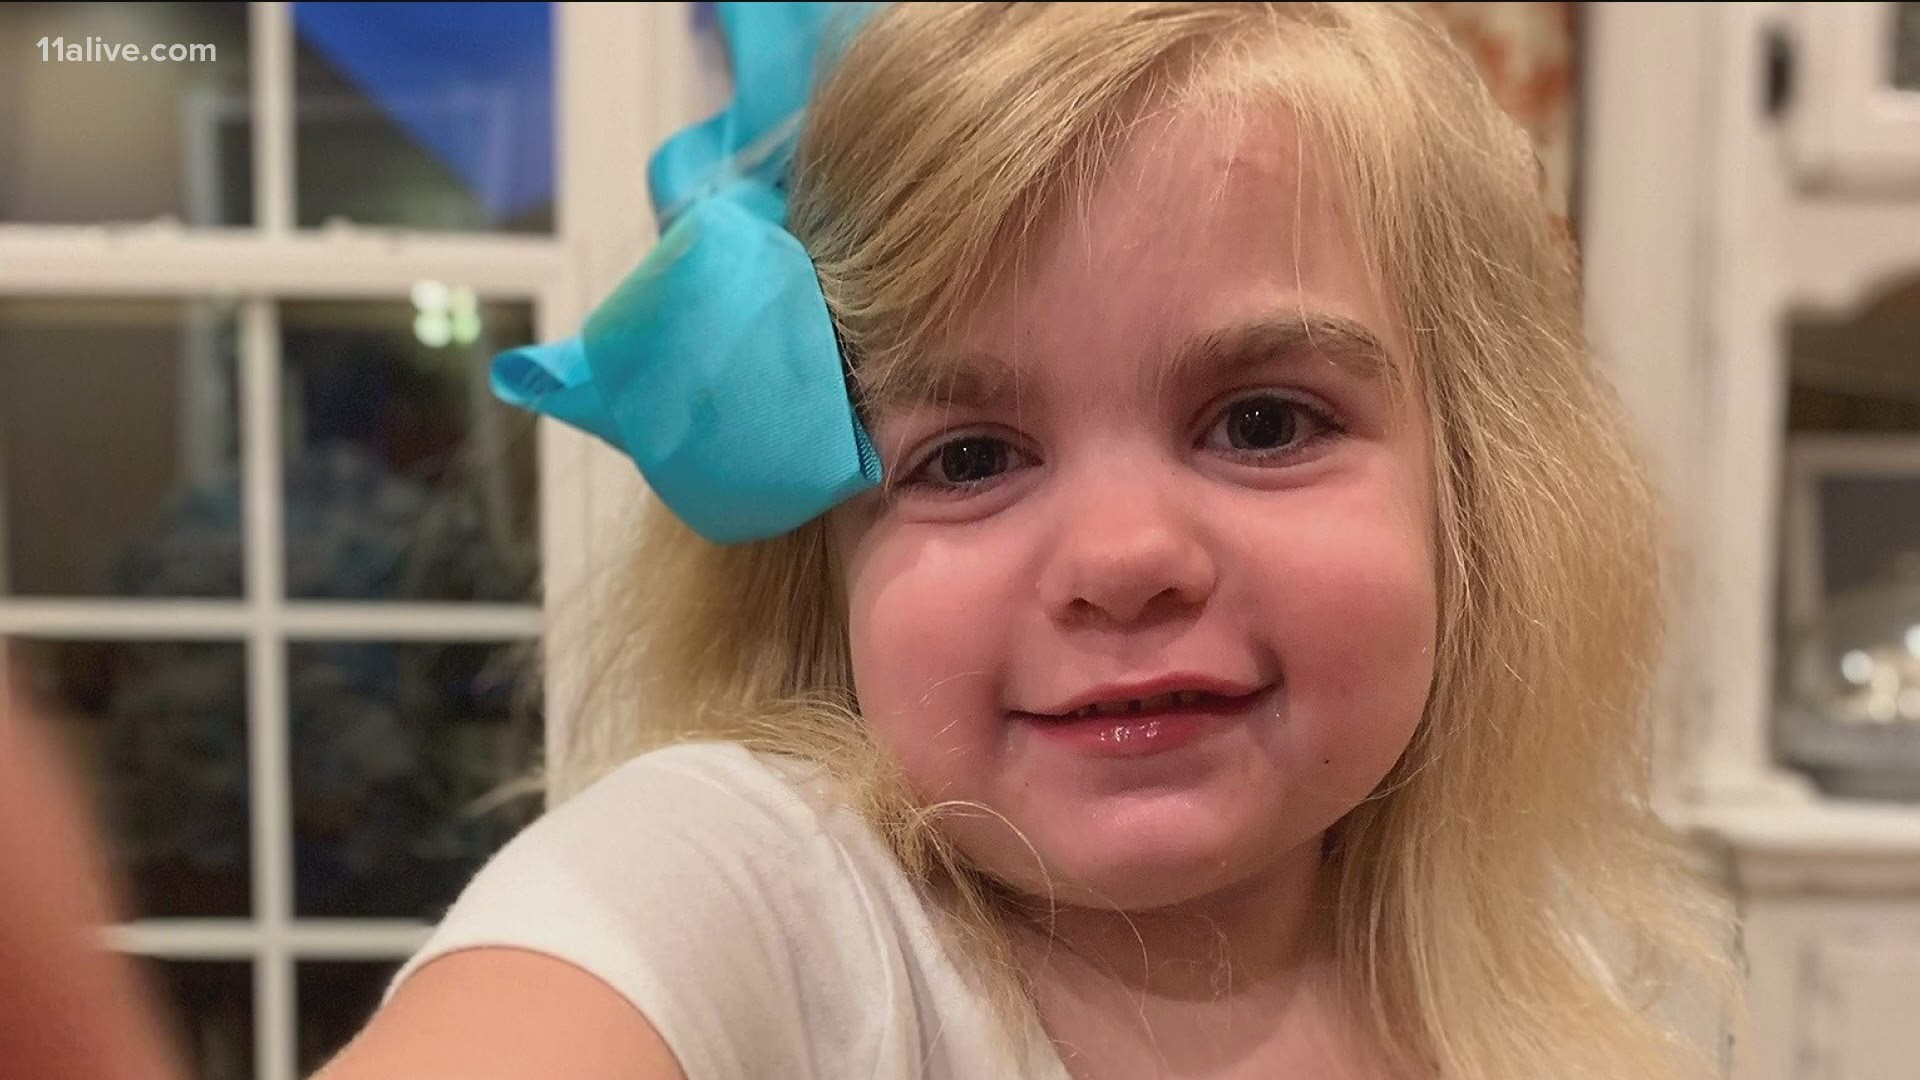 5-year-old diagnosed with Sanfilippo Syndrome amid pandemic 